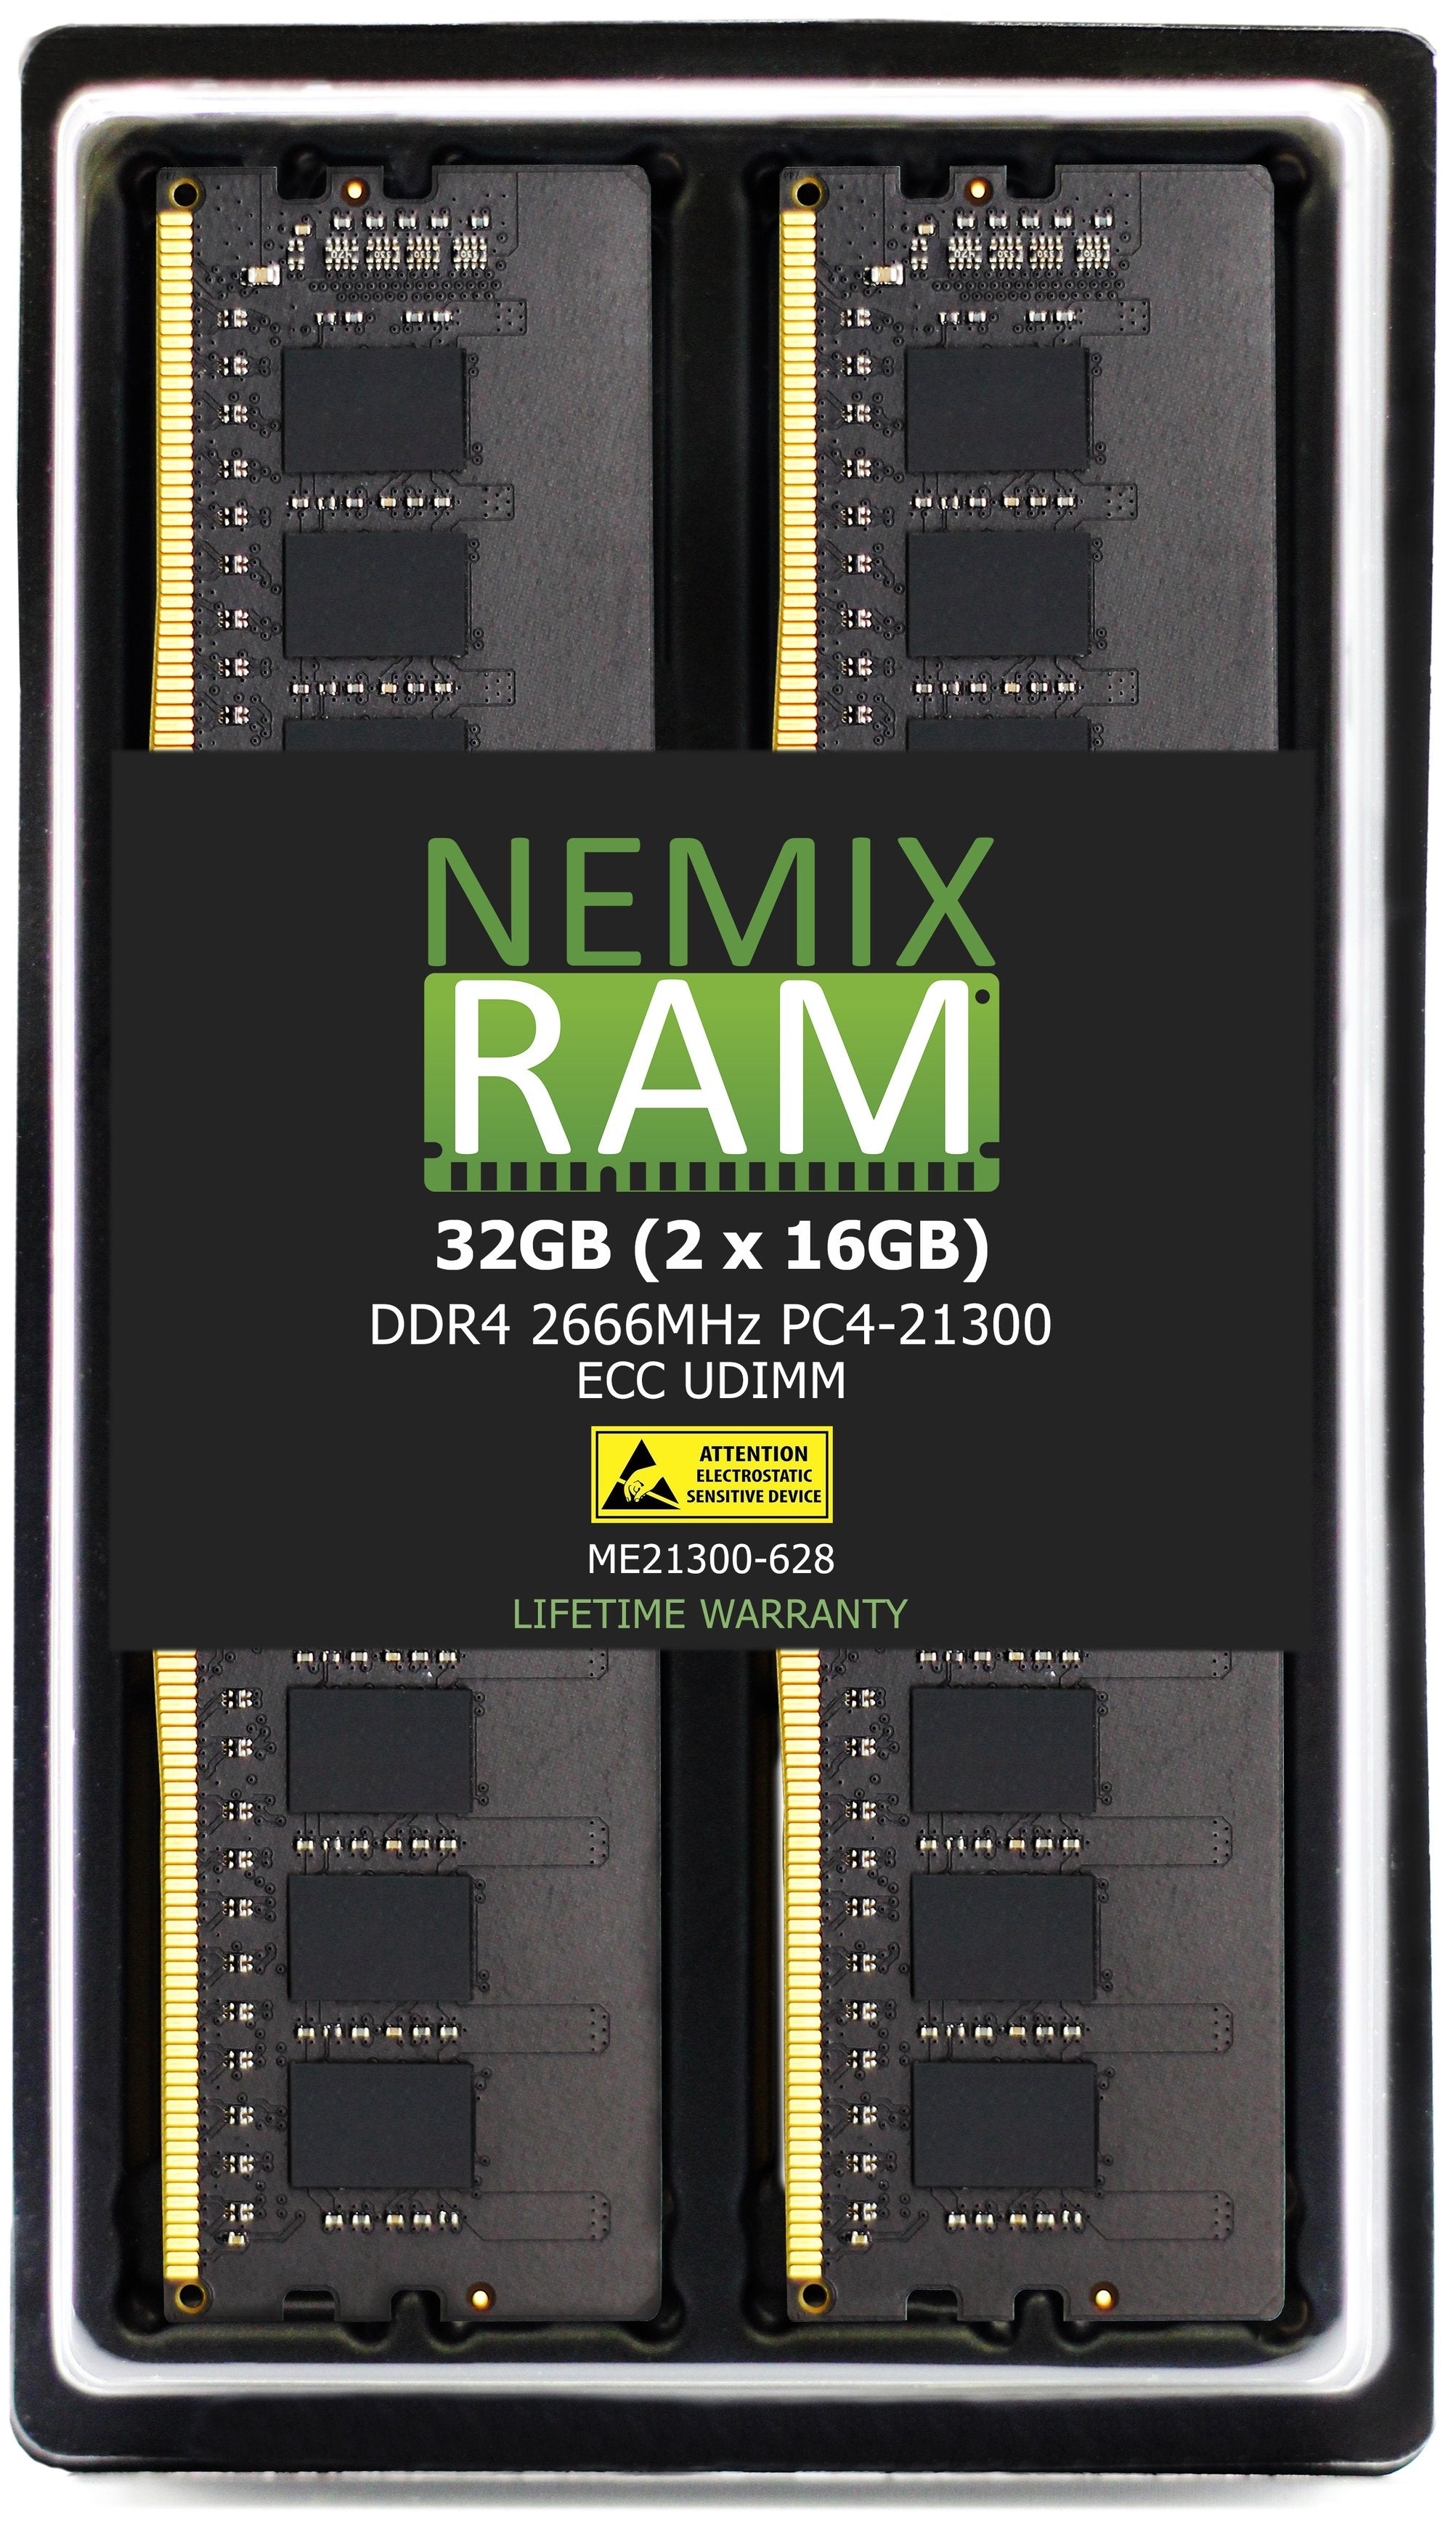 DDR4 2666MHZ PC4-21300 ECC UDIMM Compatible with Synology RackStation RS4021xs+